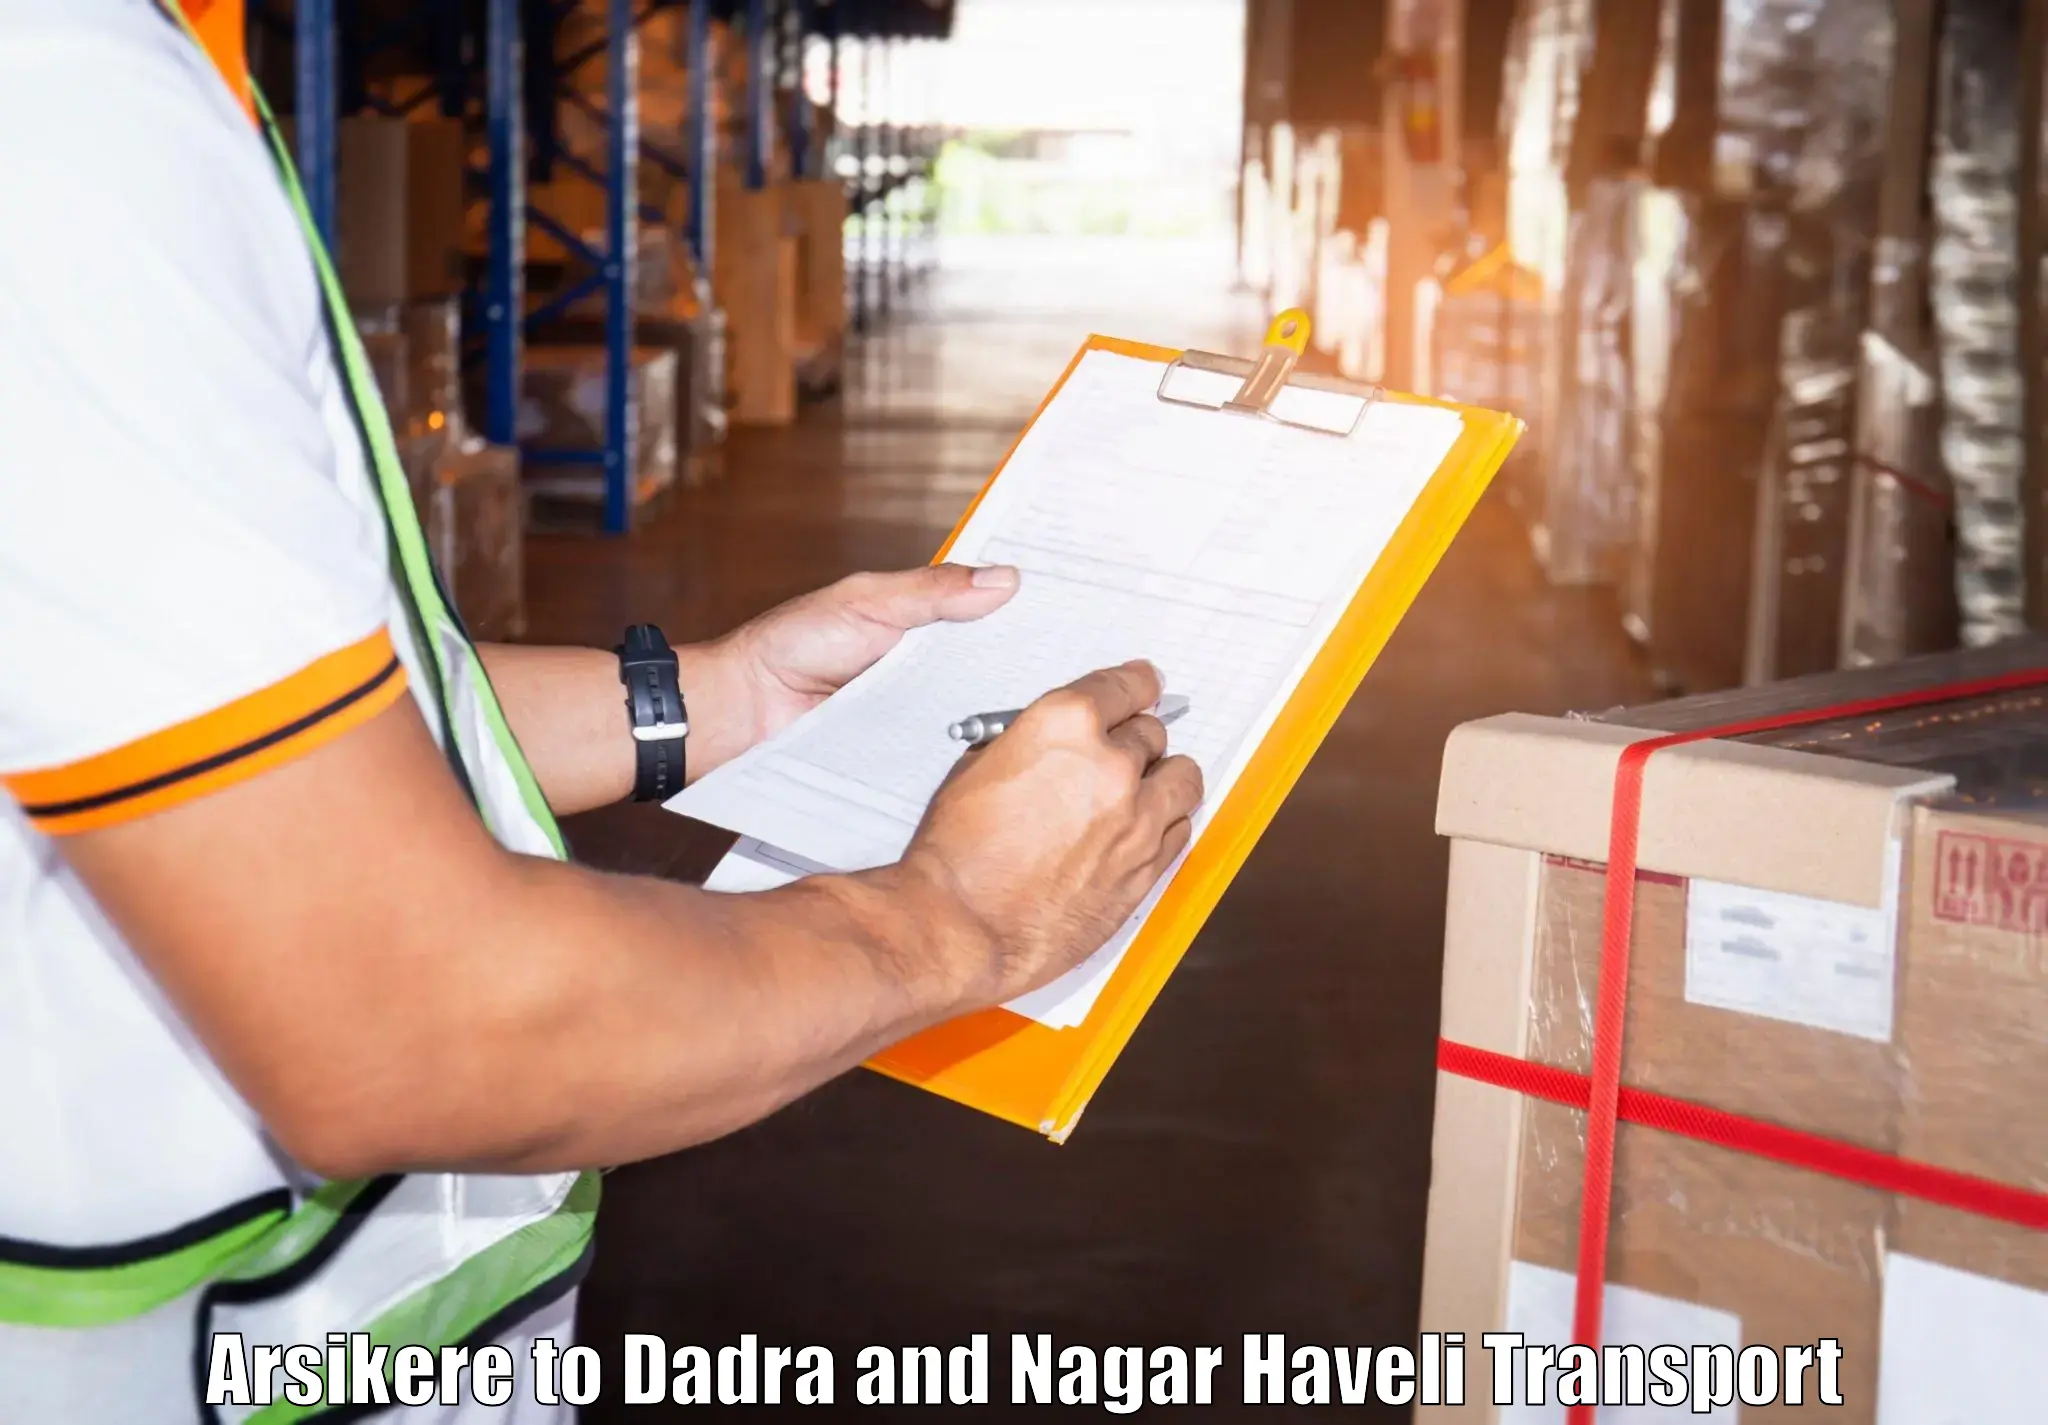 Nationwide transport services Arsikere to Dadra and Nagar Haveli